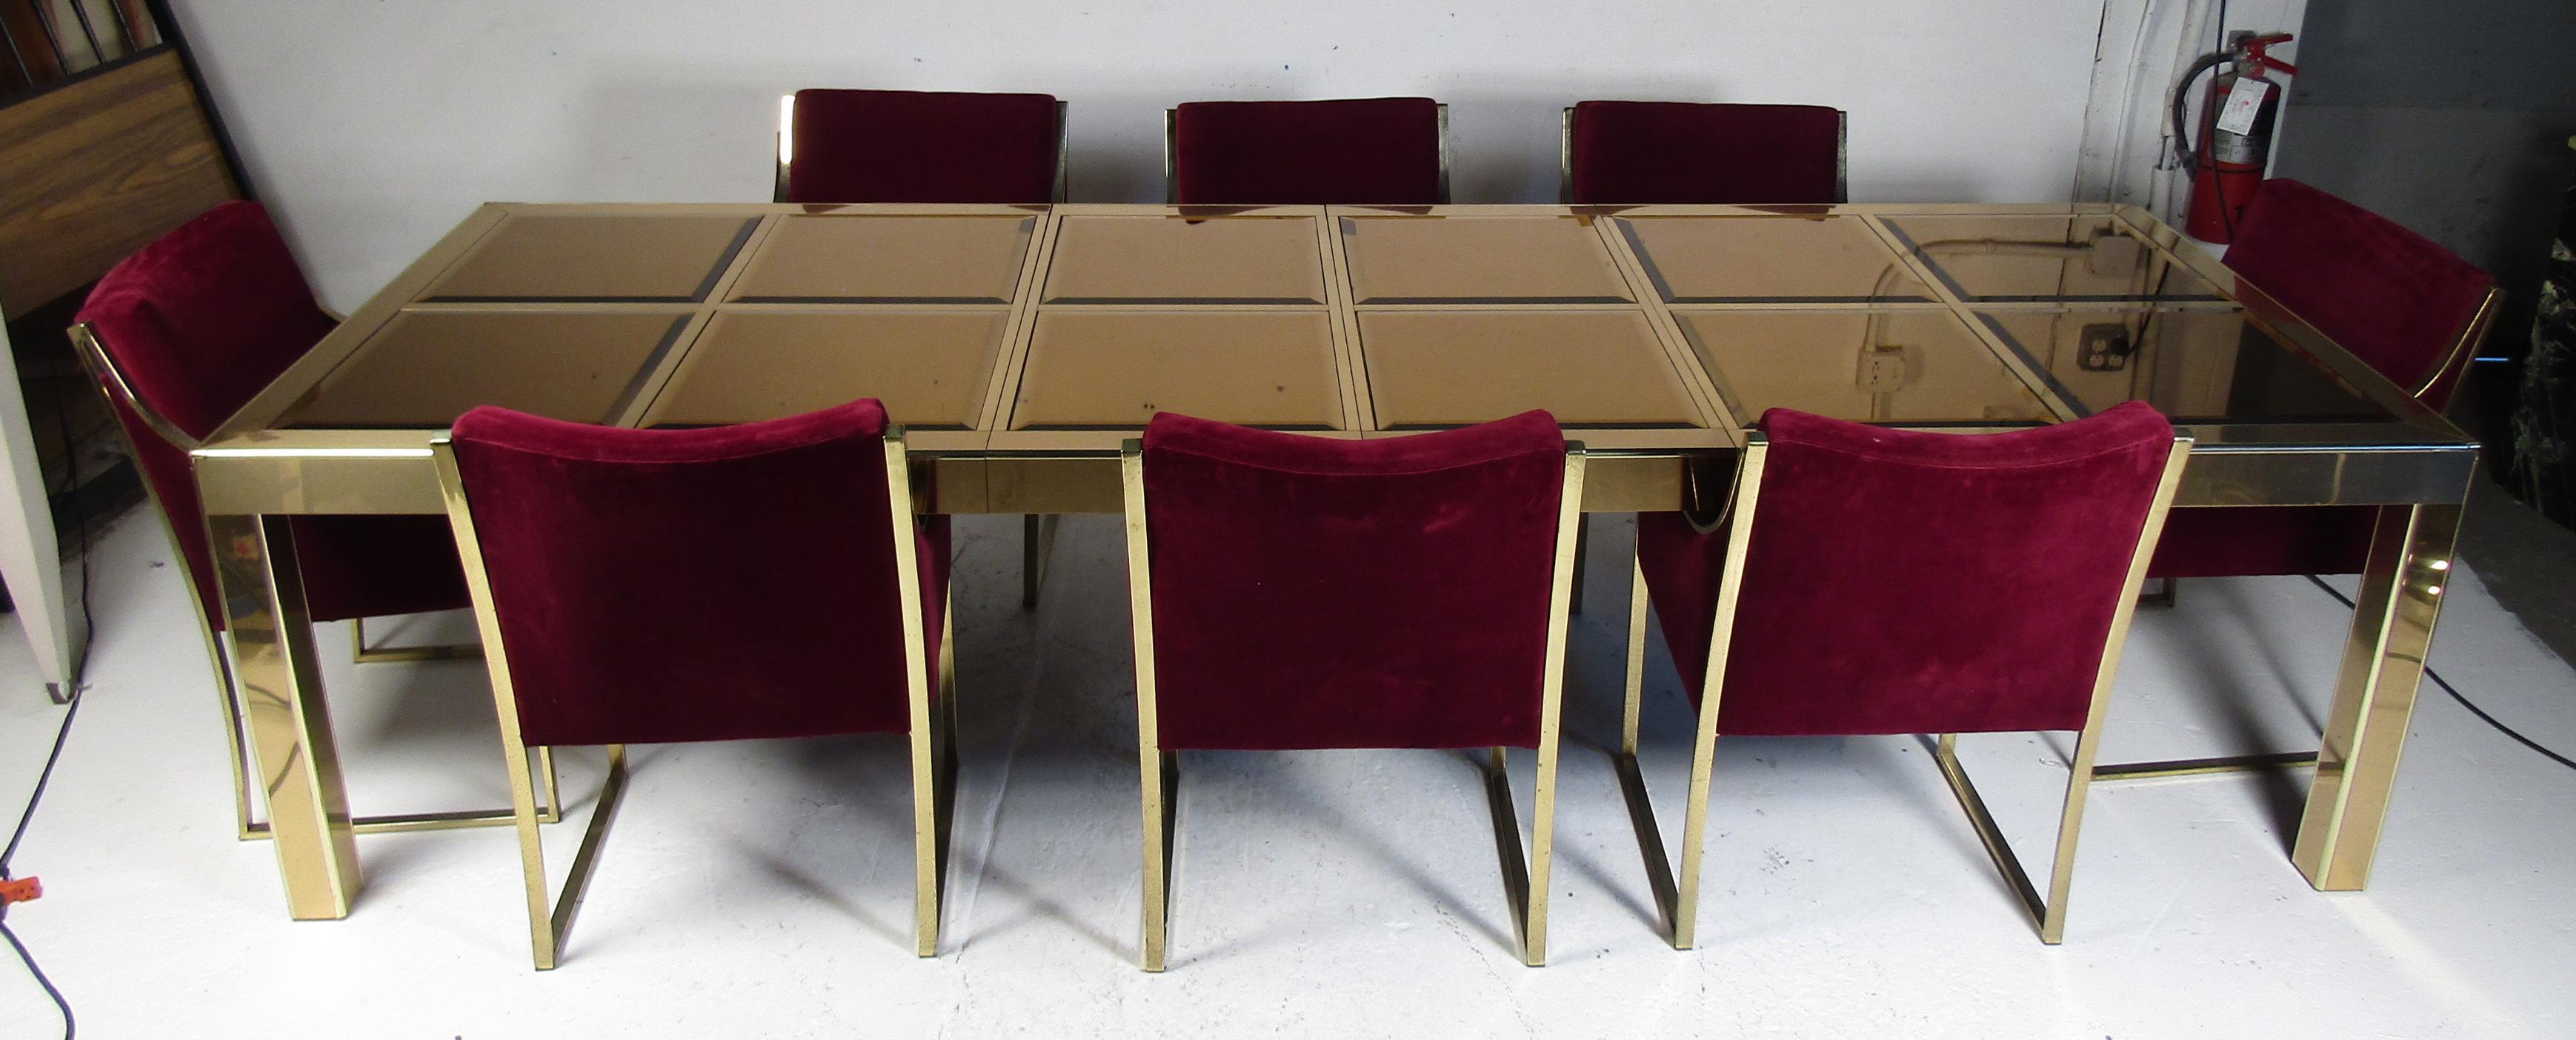 Long Mastercraft Table & Chairs 5